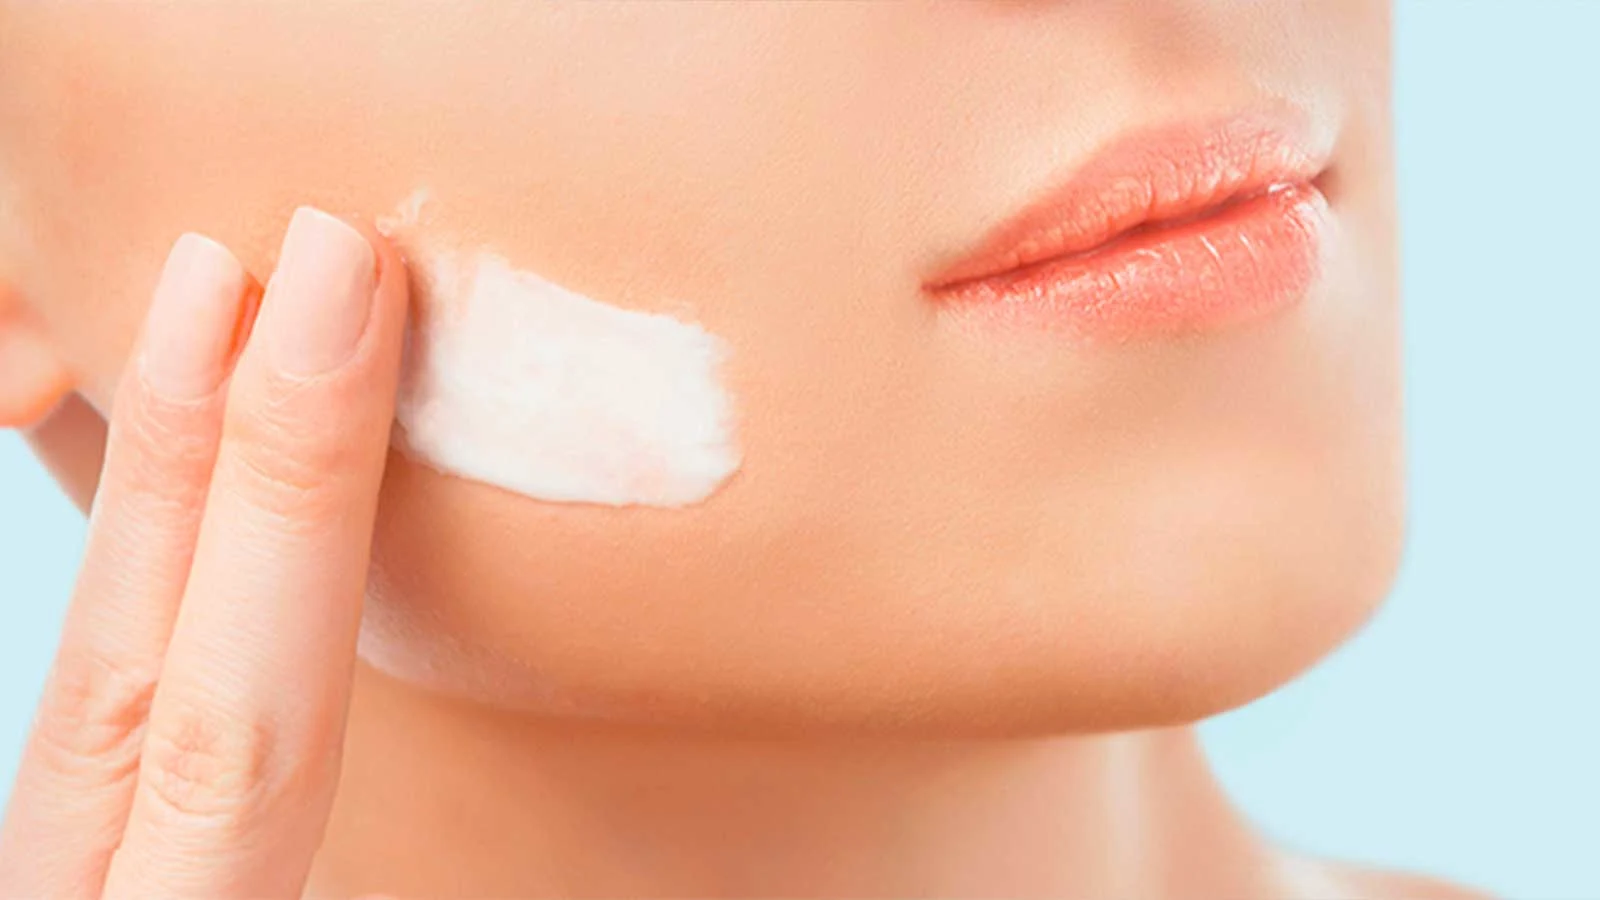 Face Shaving for Women: Pros and Cons, Best Practice Tips